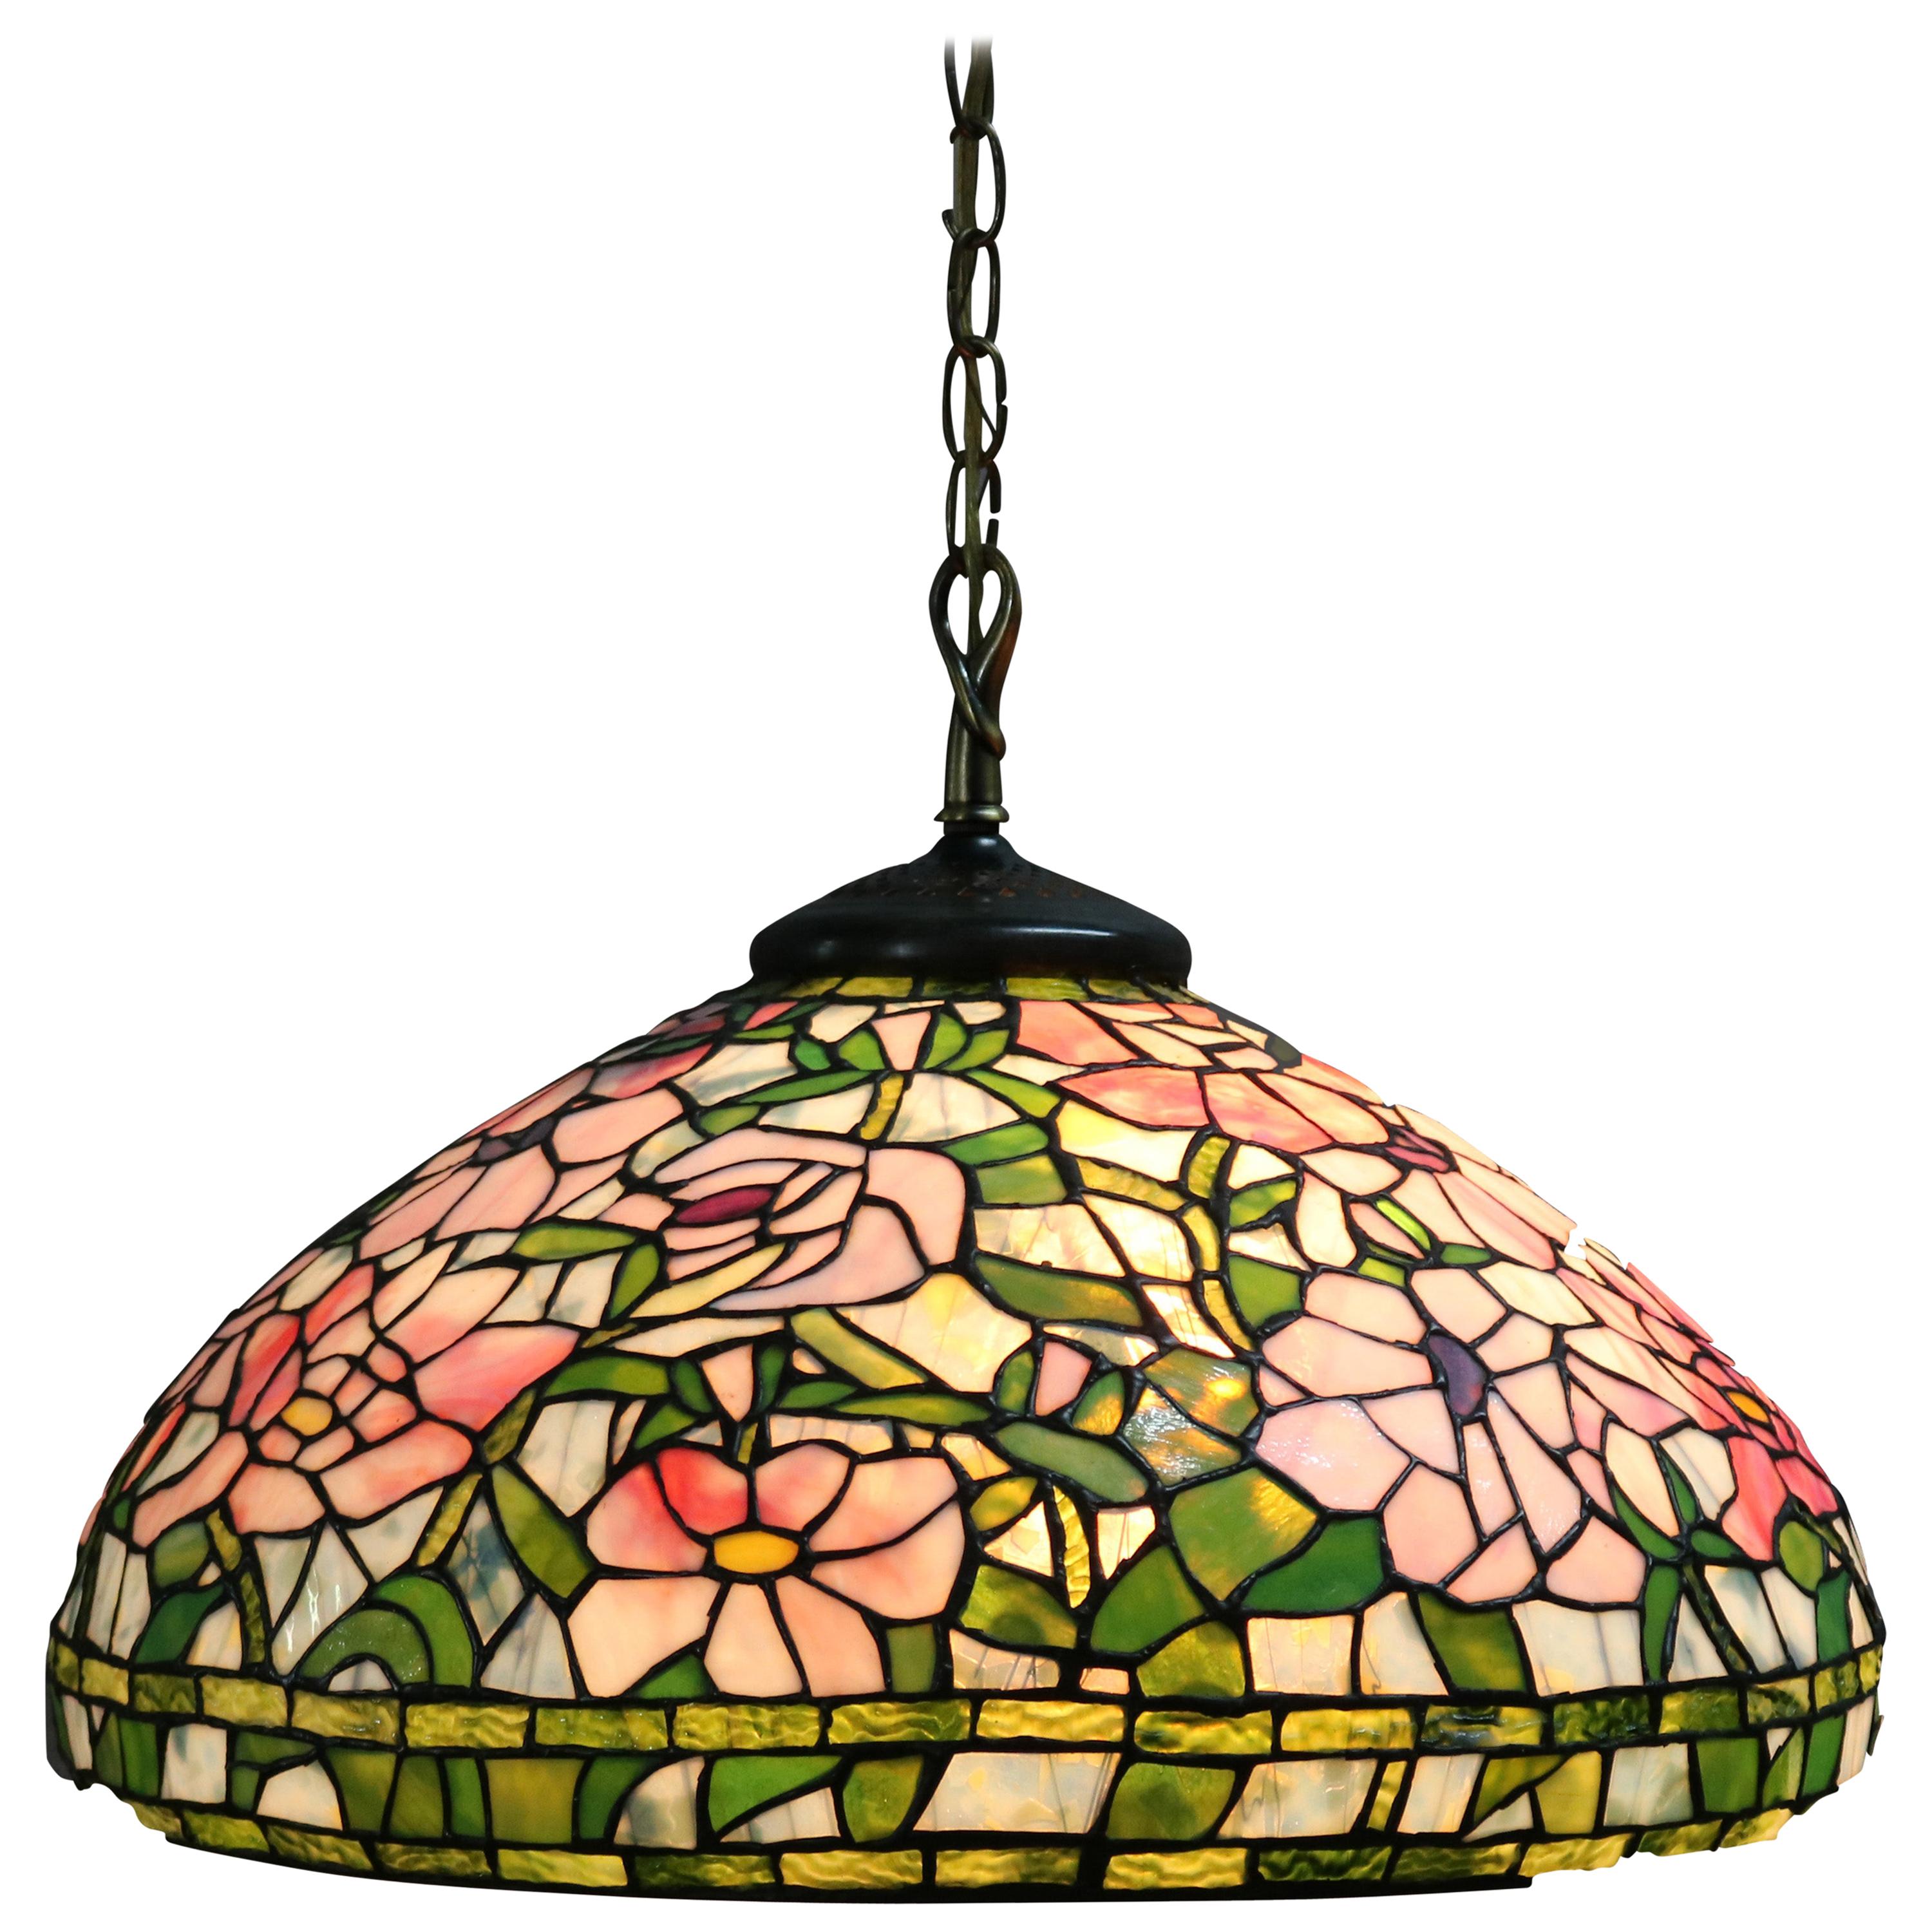 Arts & Crafts Floral Mosaic Leaded Slag Glass Hanging Dome Light, 20th Century